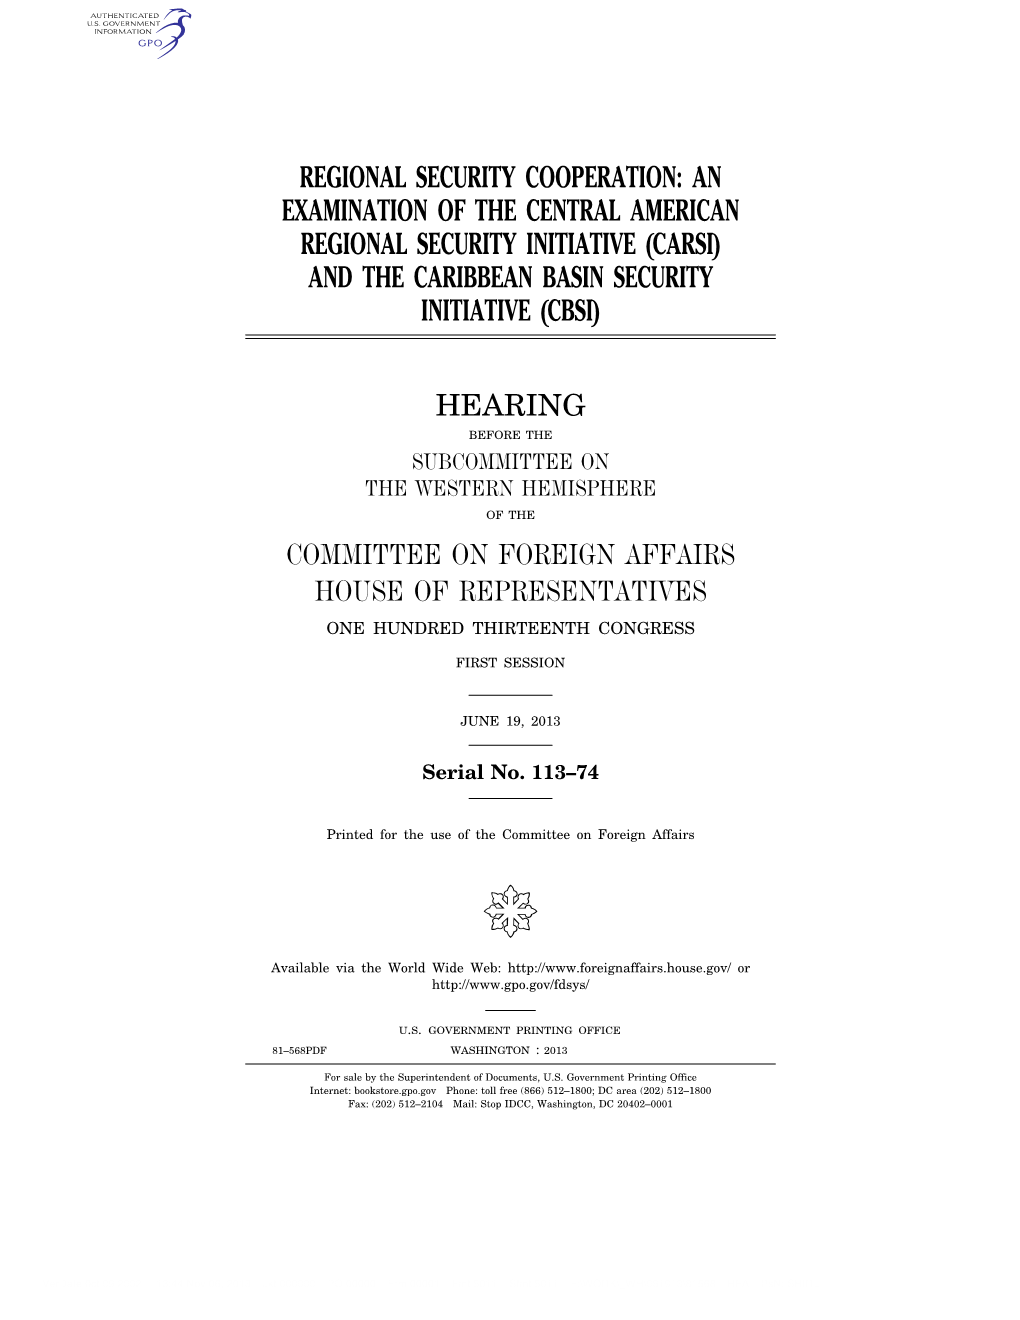 Regional Security Cooperation: an Examination of the Central American Regional Security Initiative (Carsi) and the Caribbean Basin Security Initiative (Cbsi)